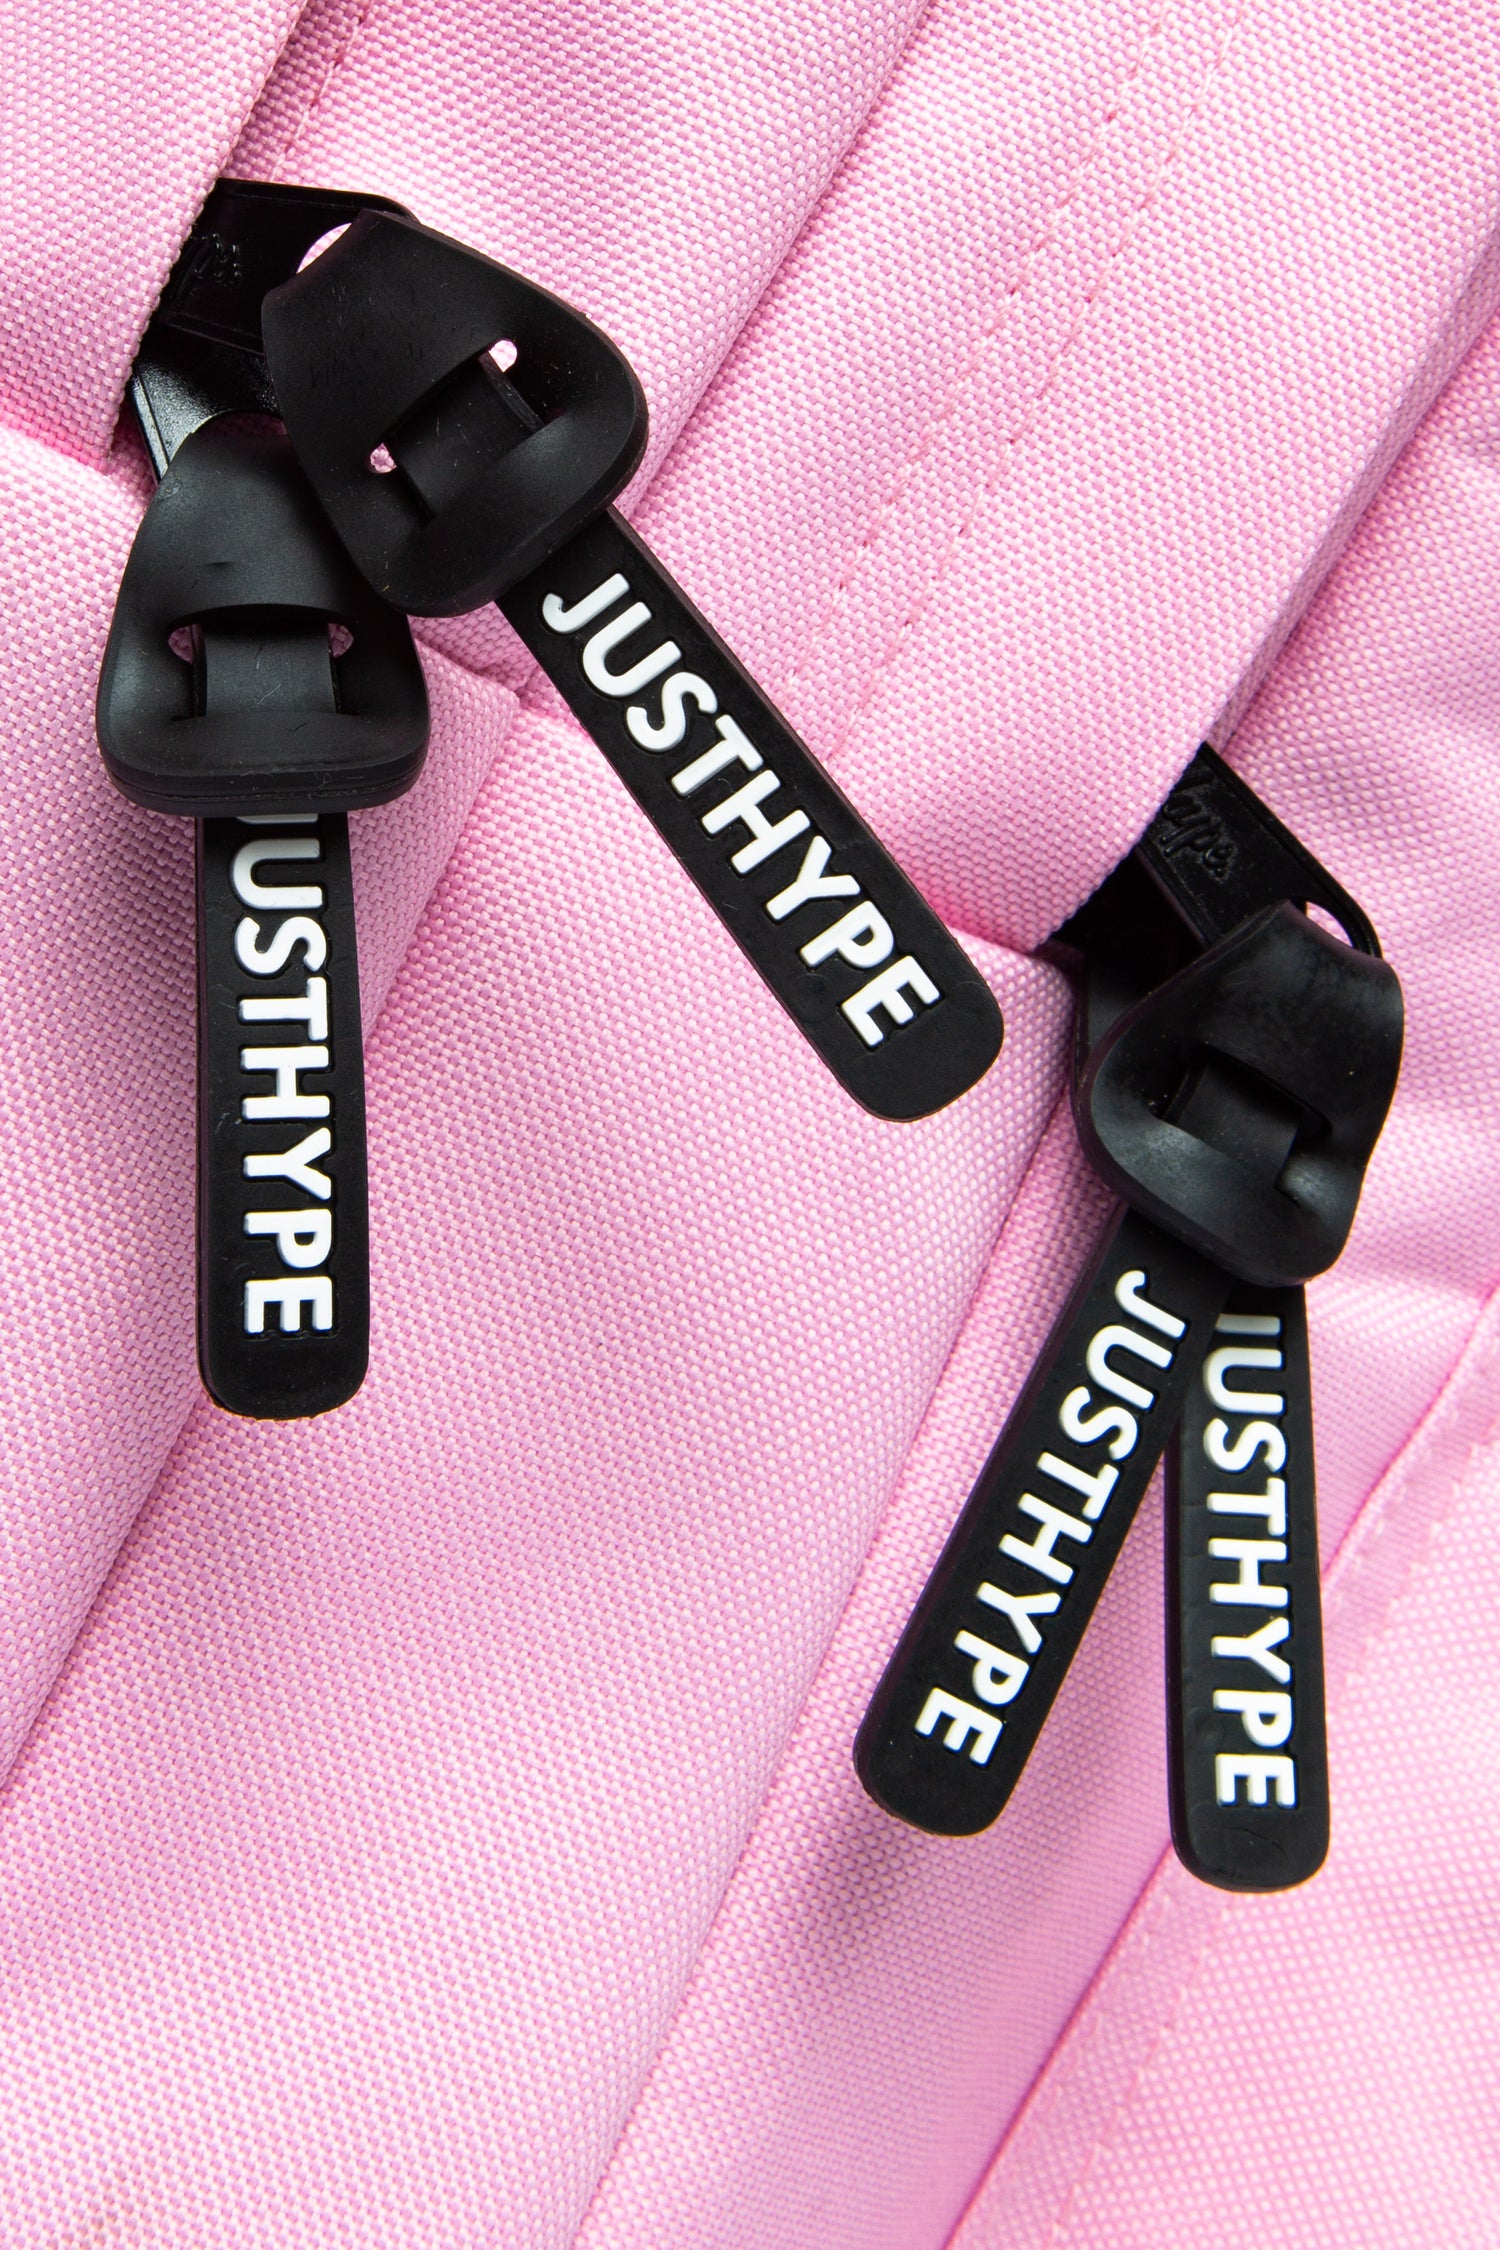 HYPE PINK UTILITY BACKPACK